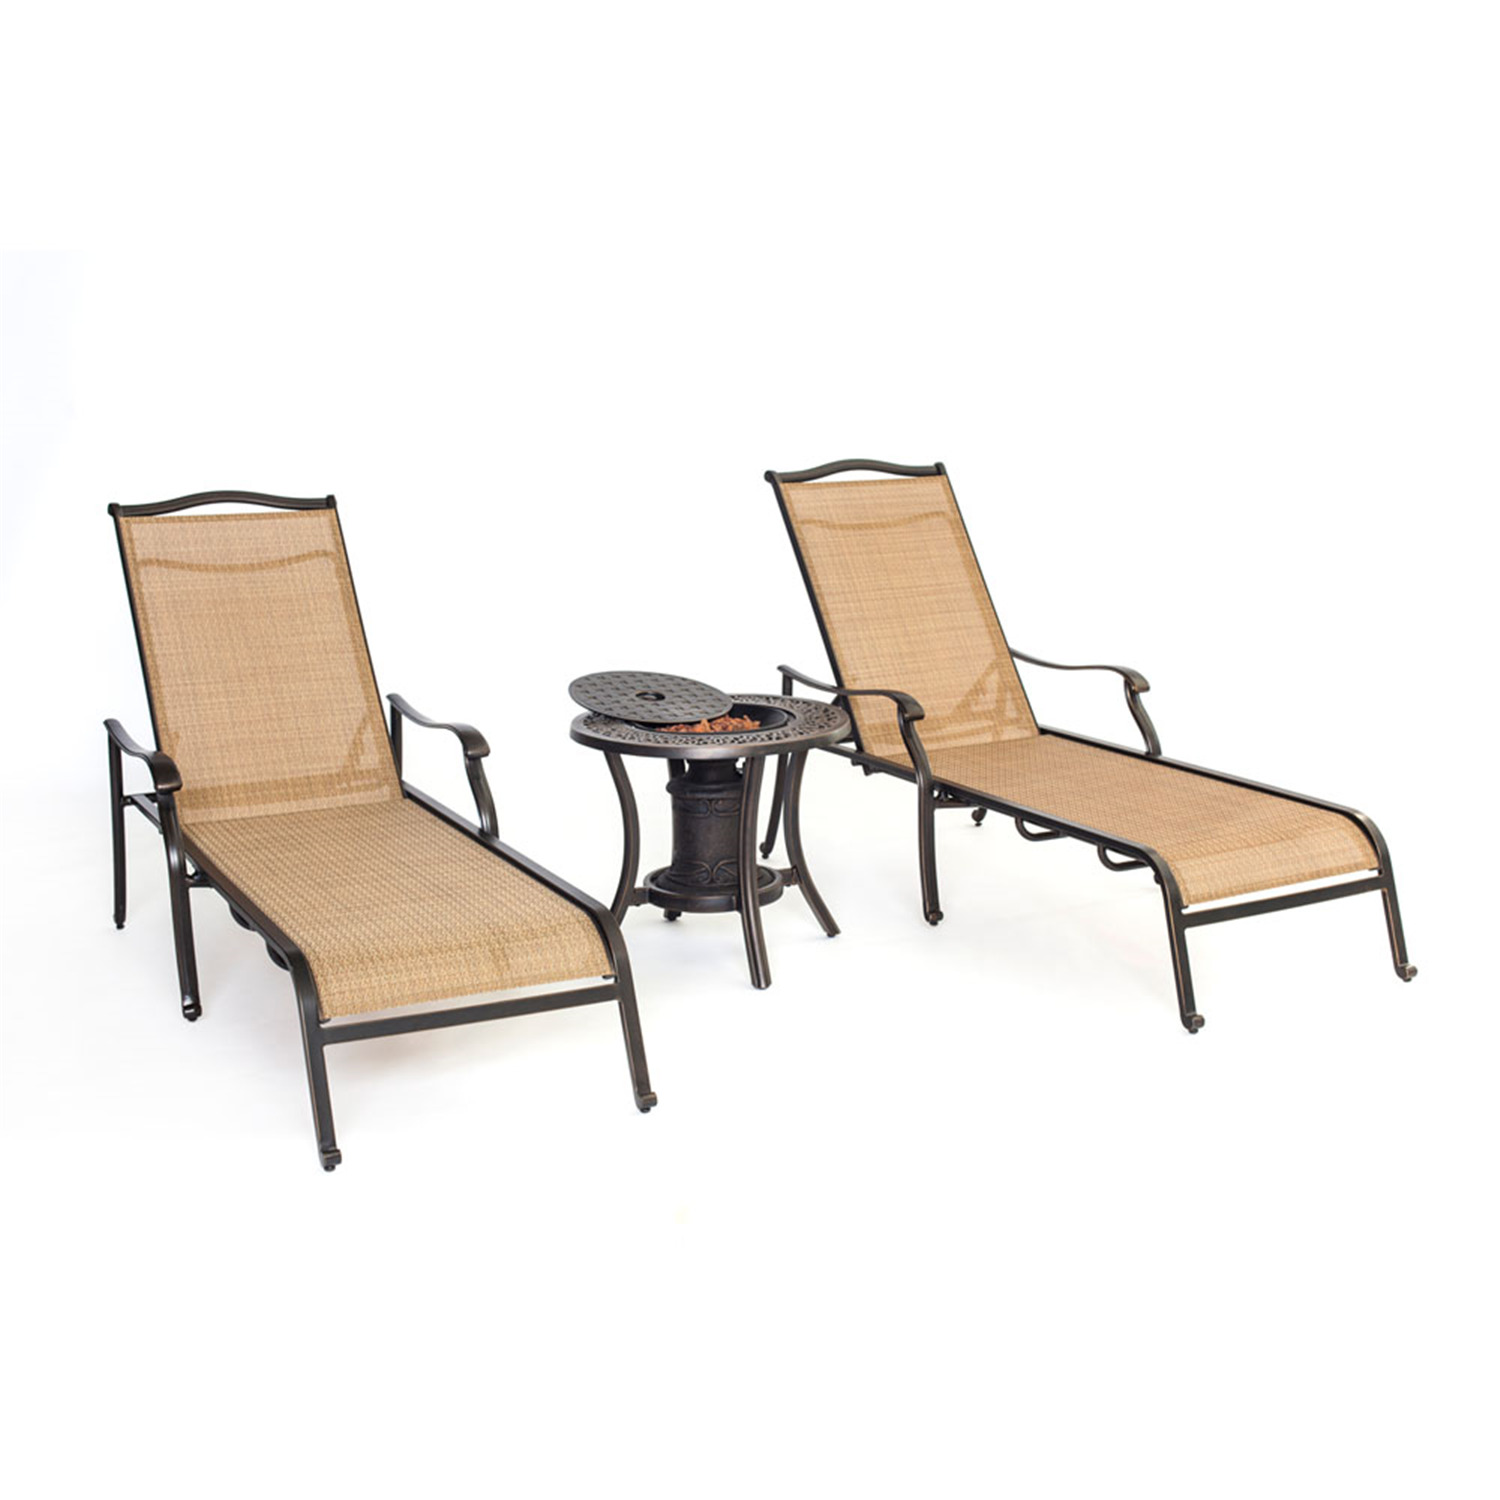 Hanover Outdoor Monaco Chaise Lounge Set with Fire Urn, Cedar/Bronze - image 1 of 10